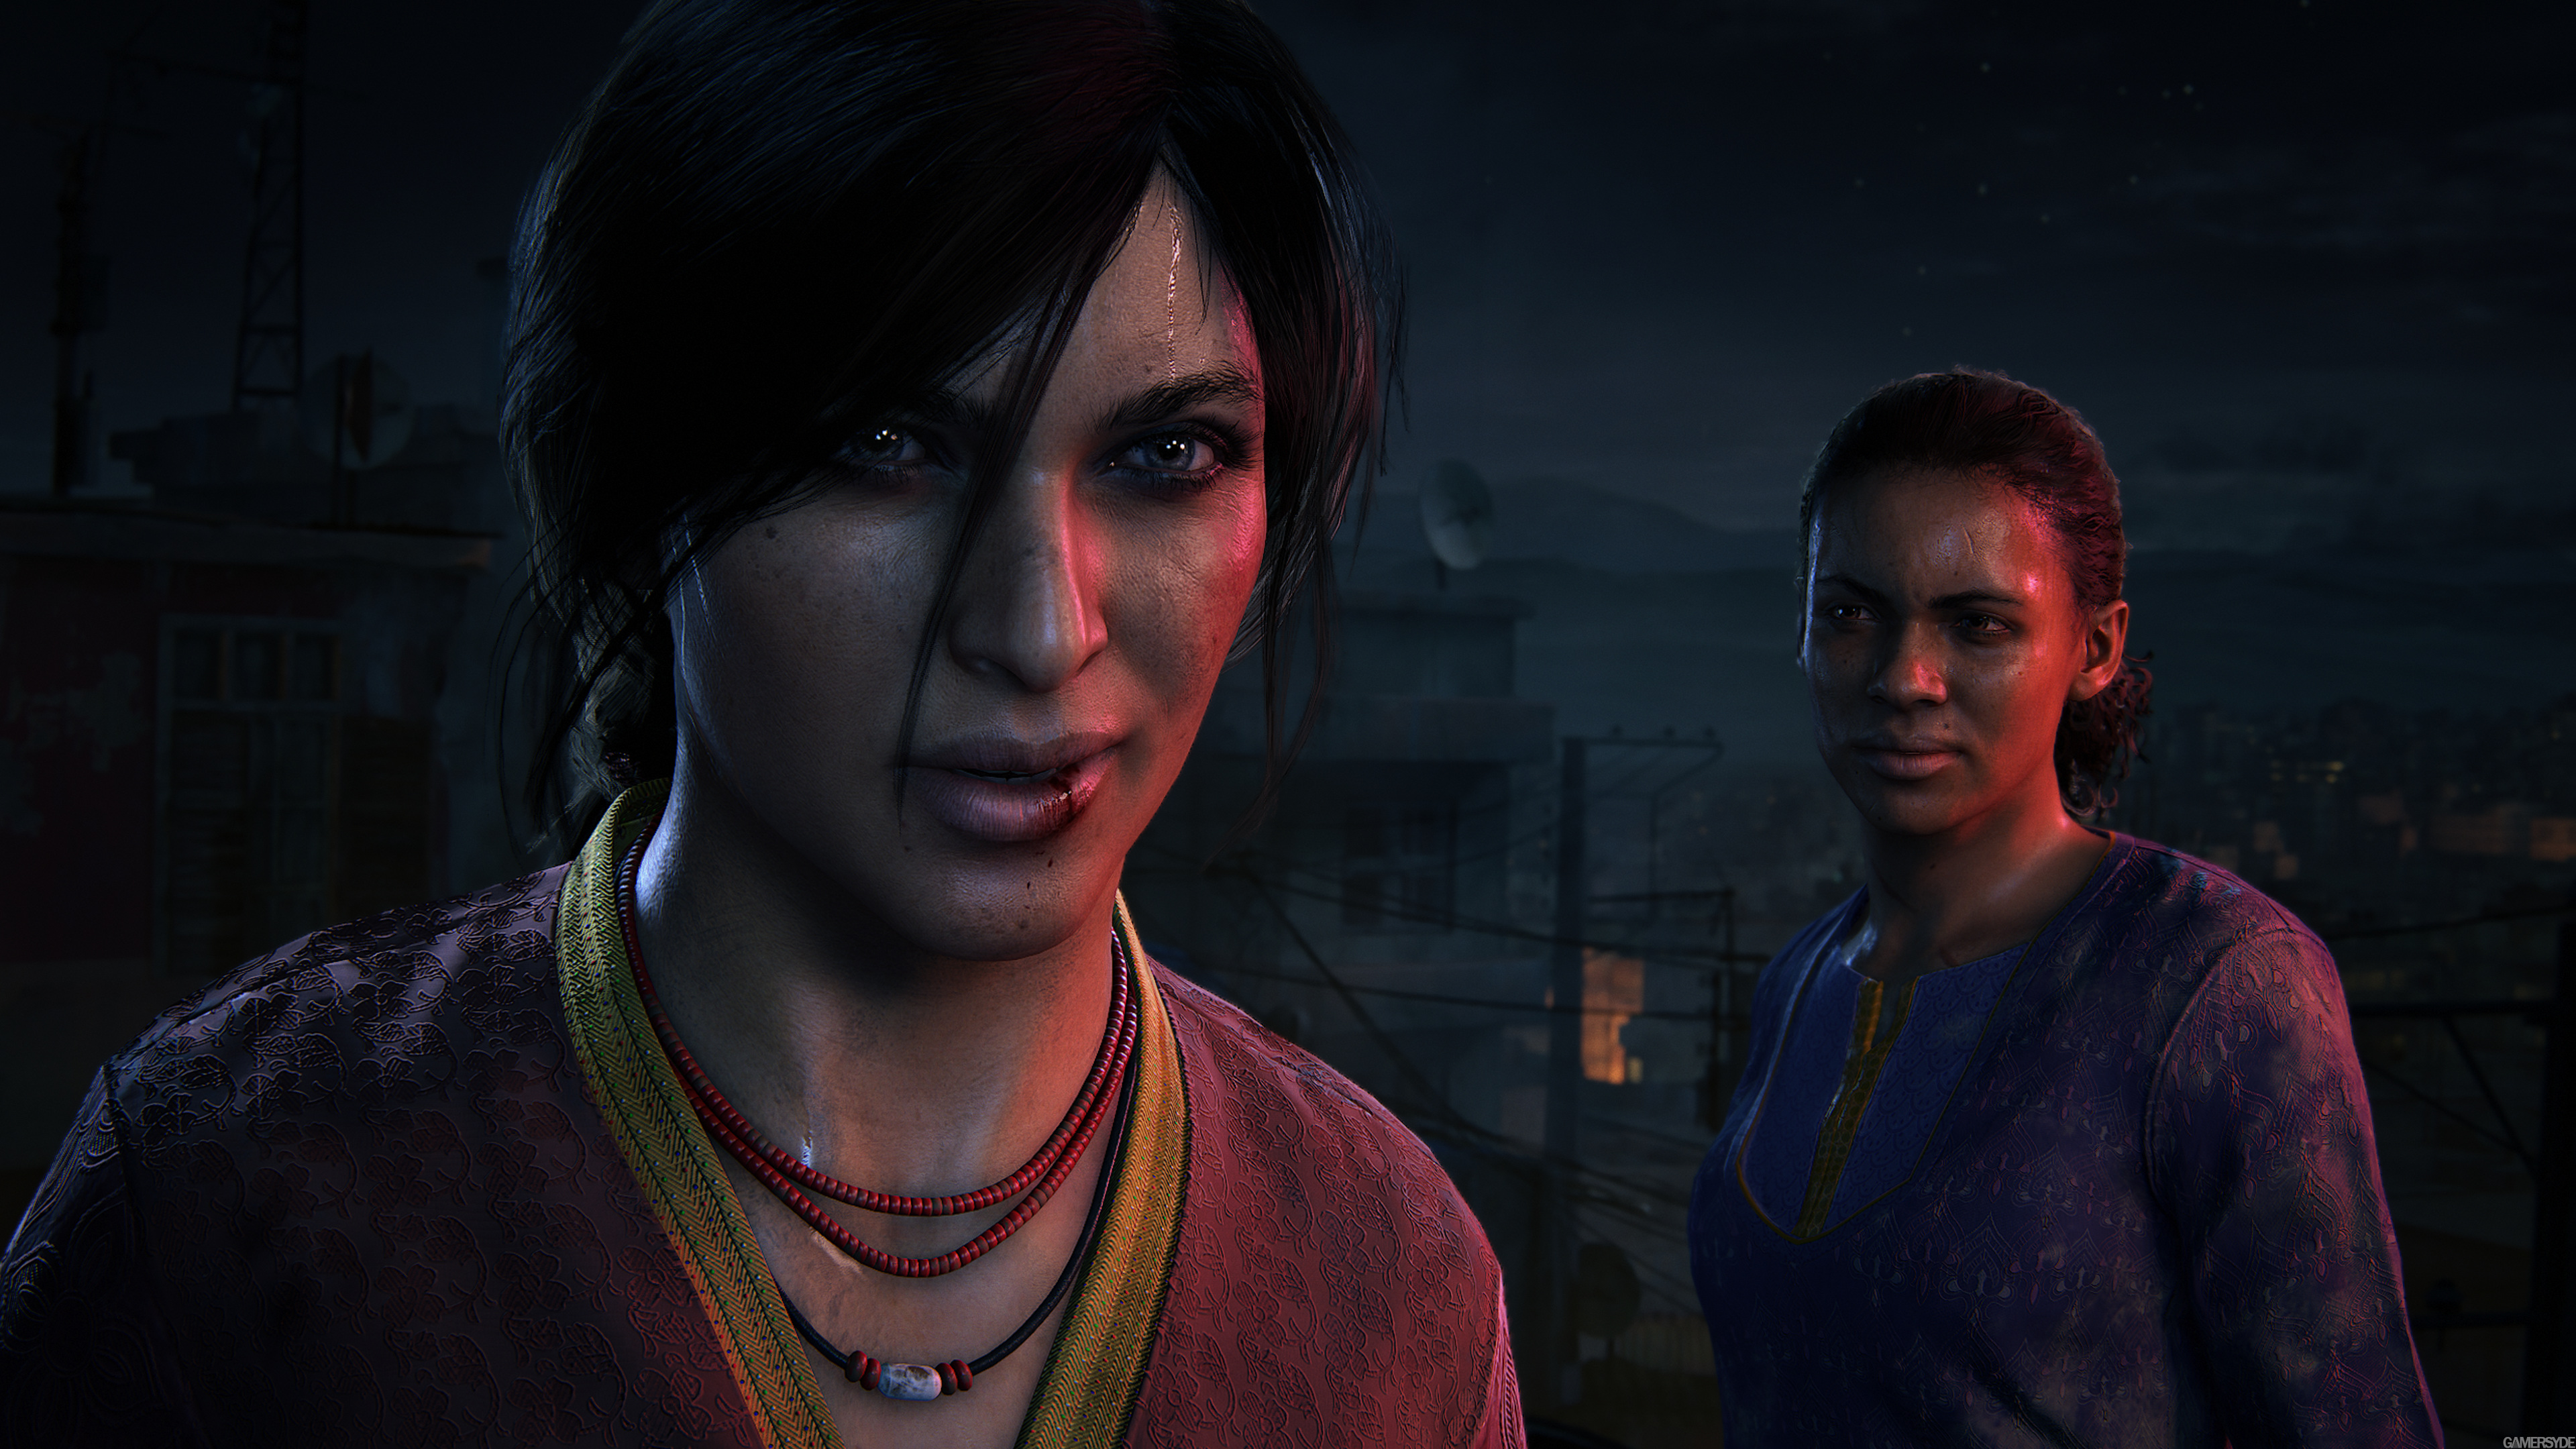 image_uncharted_the_lost_legacy-33839-3762_0001.jpg